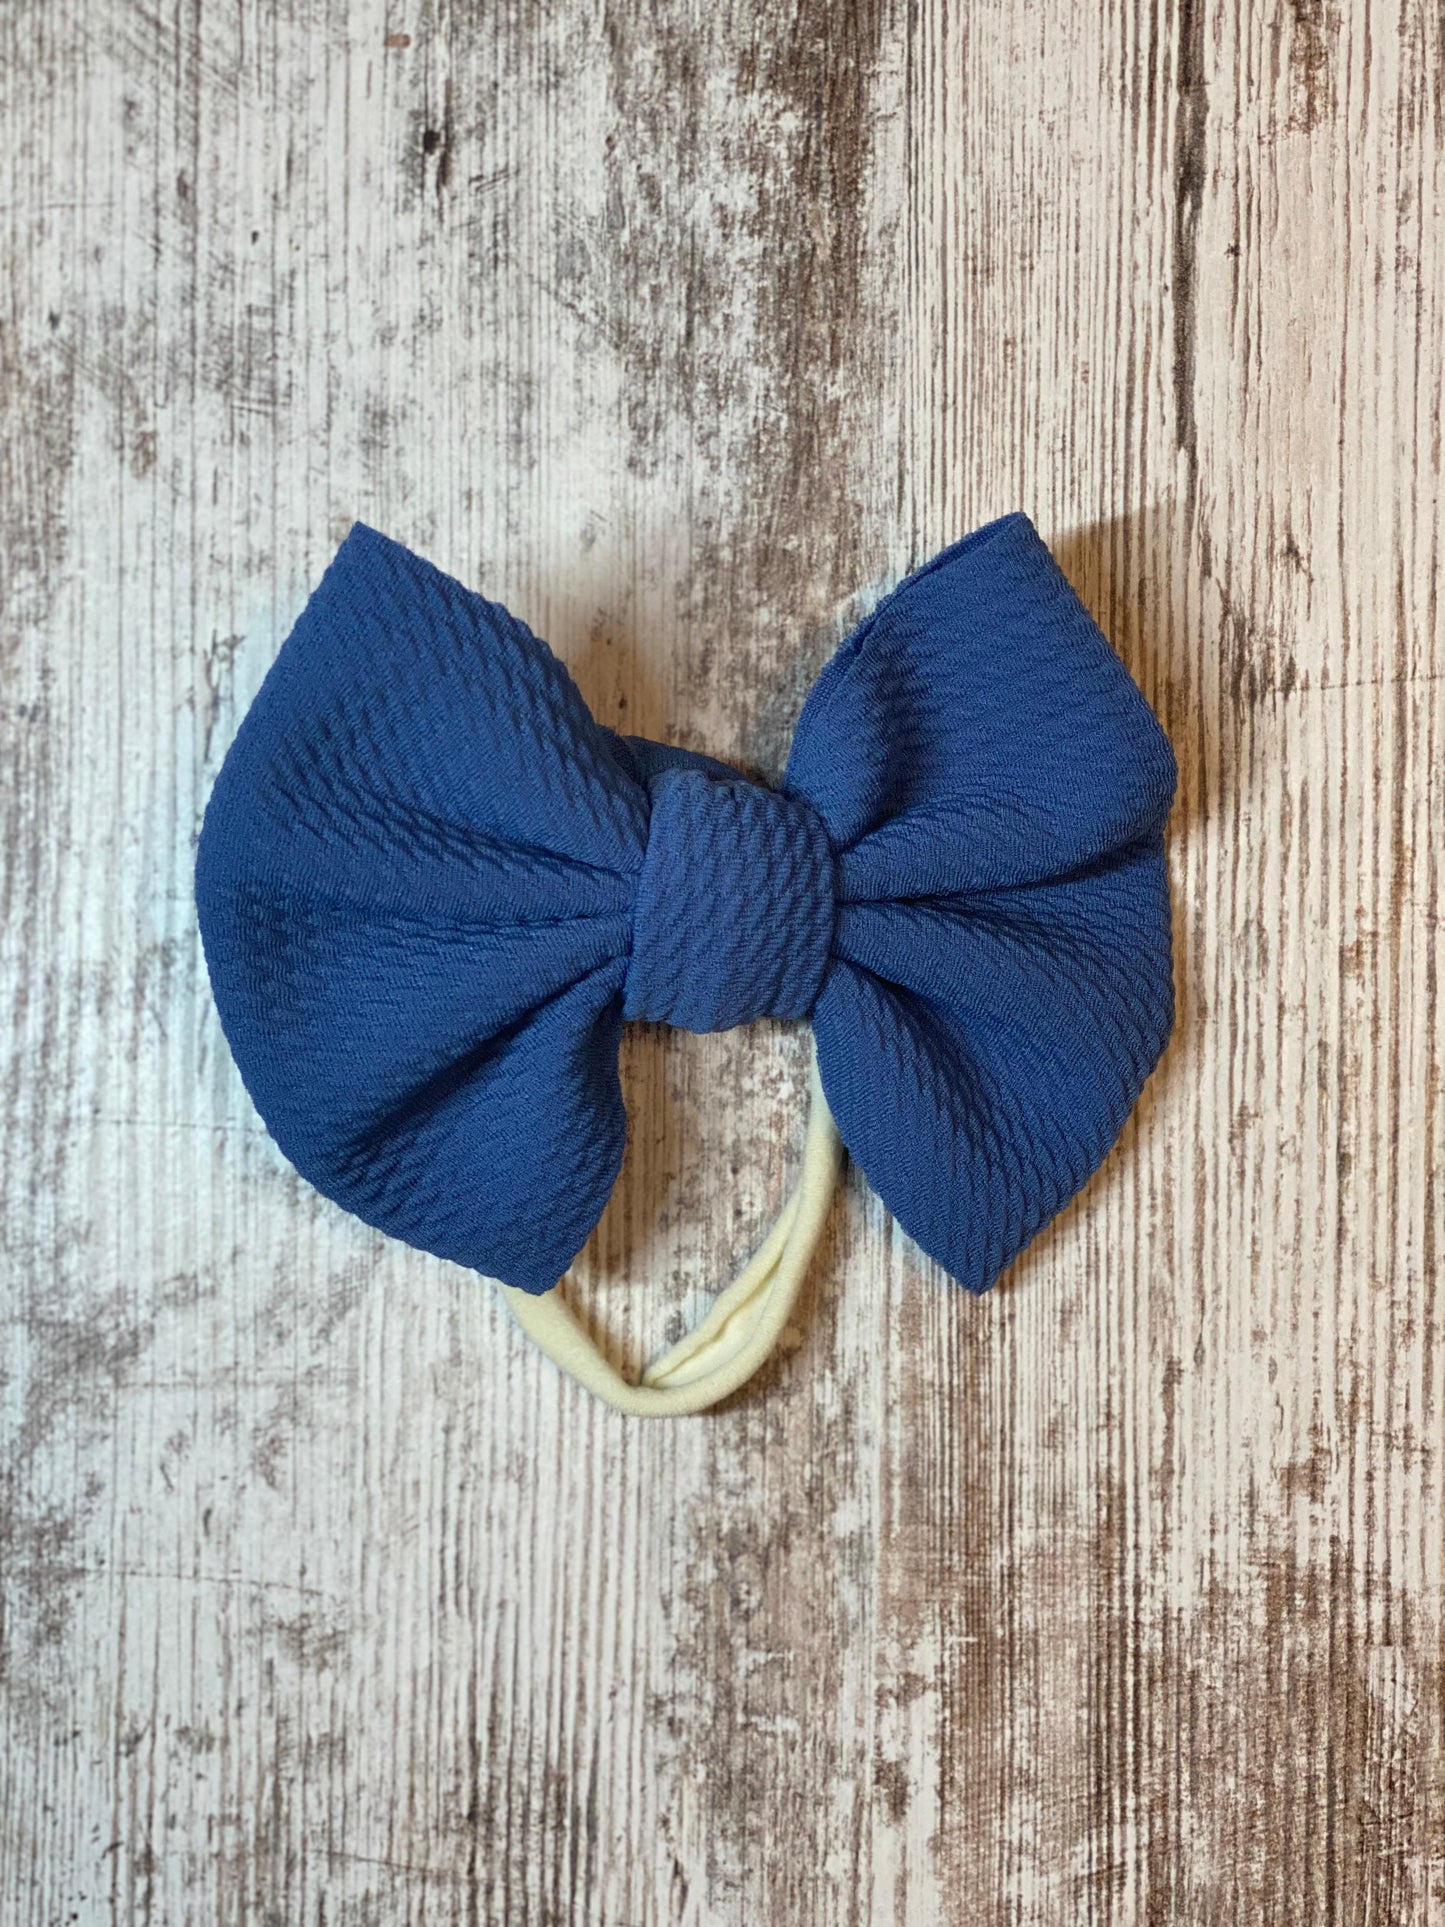 Blue Baby Bow